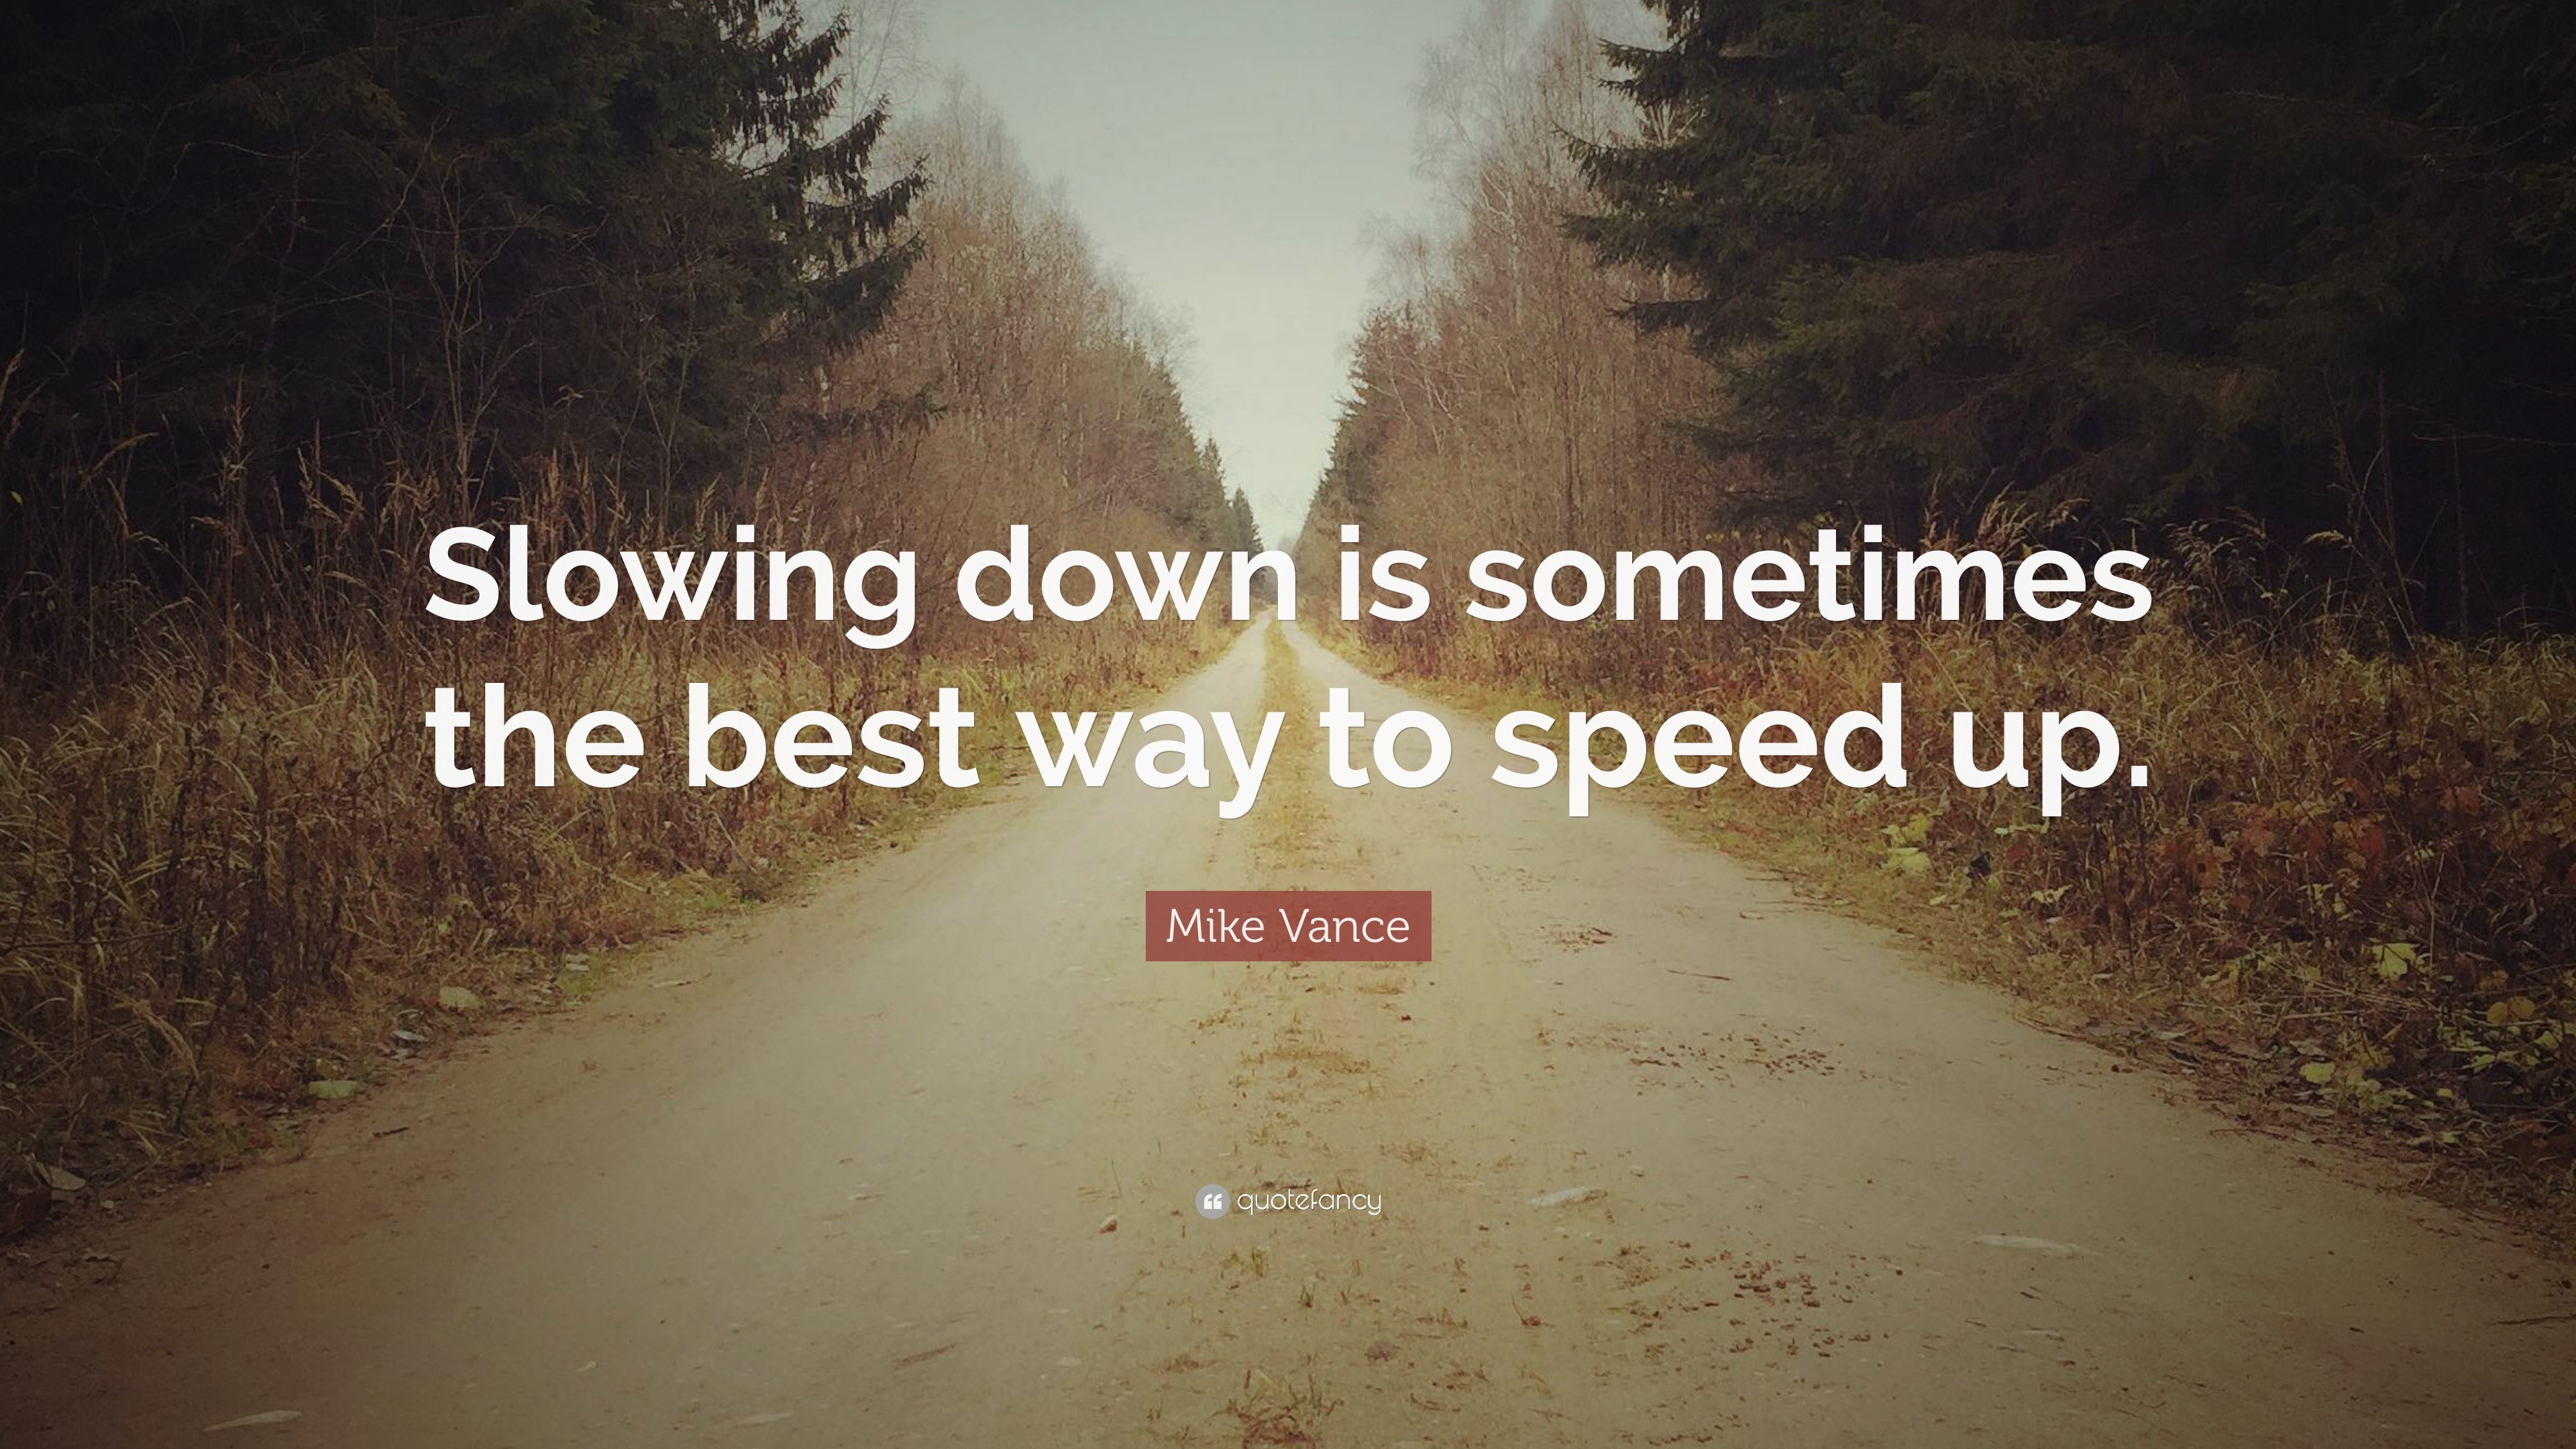 Mike Vance Quote “slowing Down Is Sometimes The Best Way To Speed Up ”